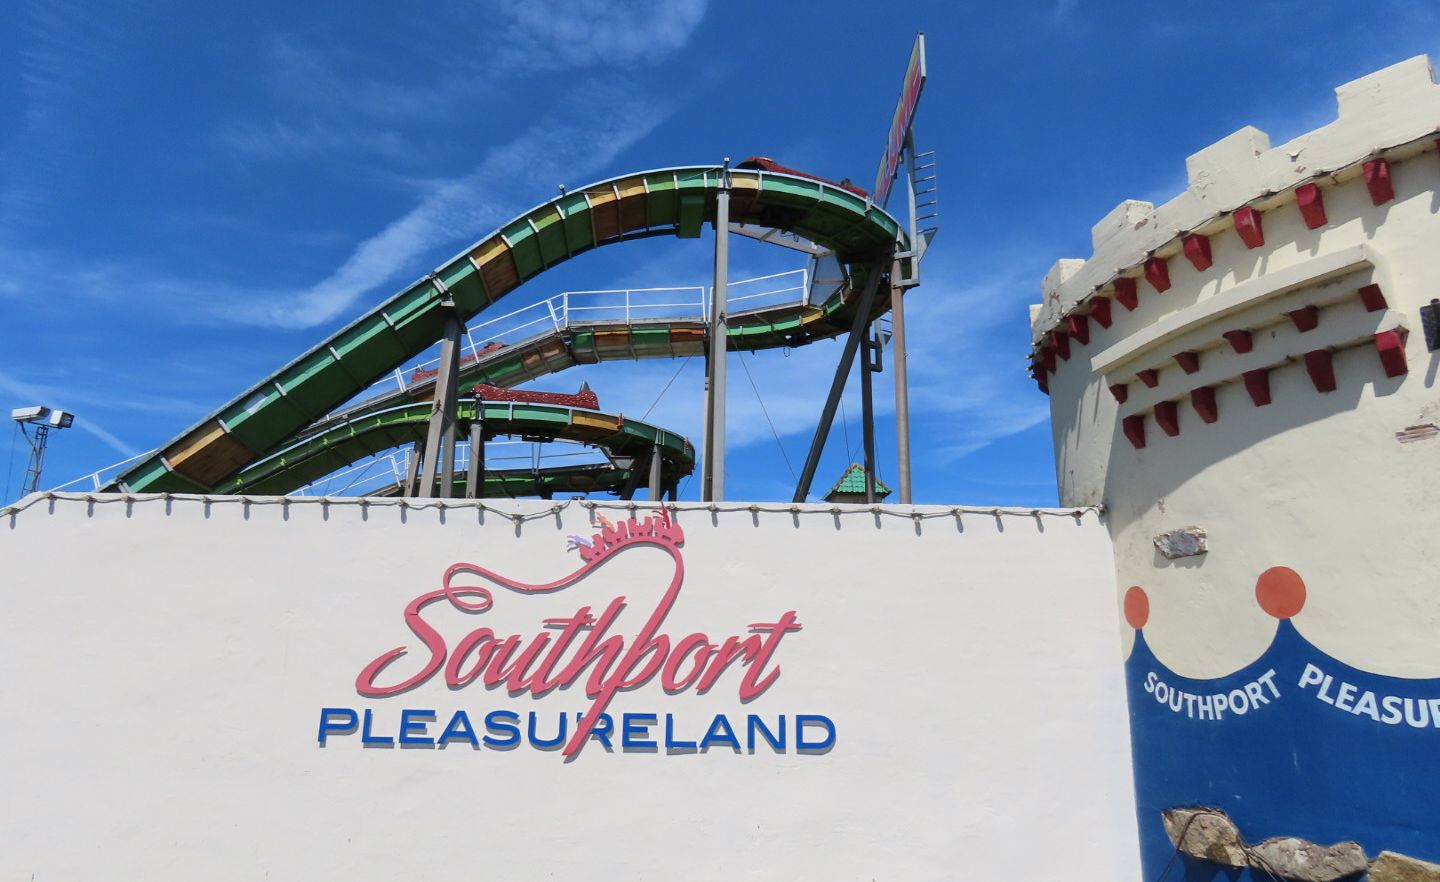 Southport Pleasureland. Photo by Andrew Brown Media